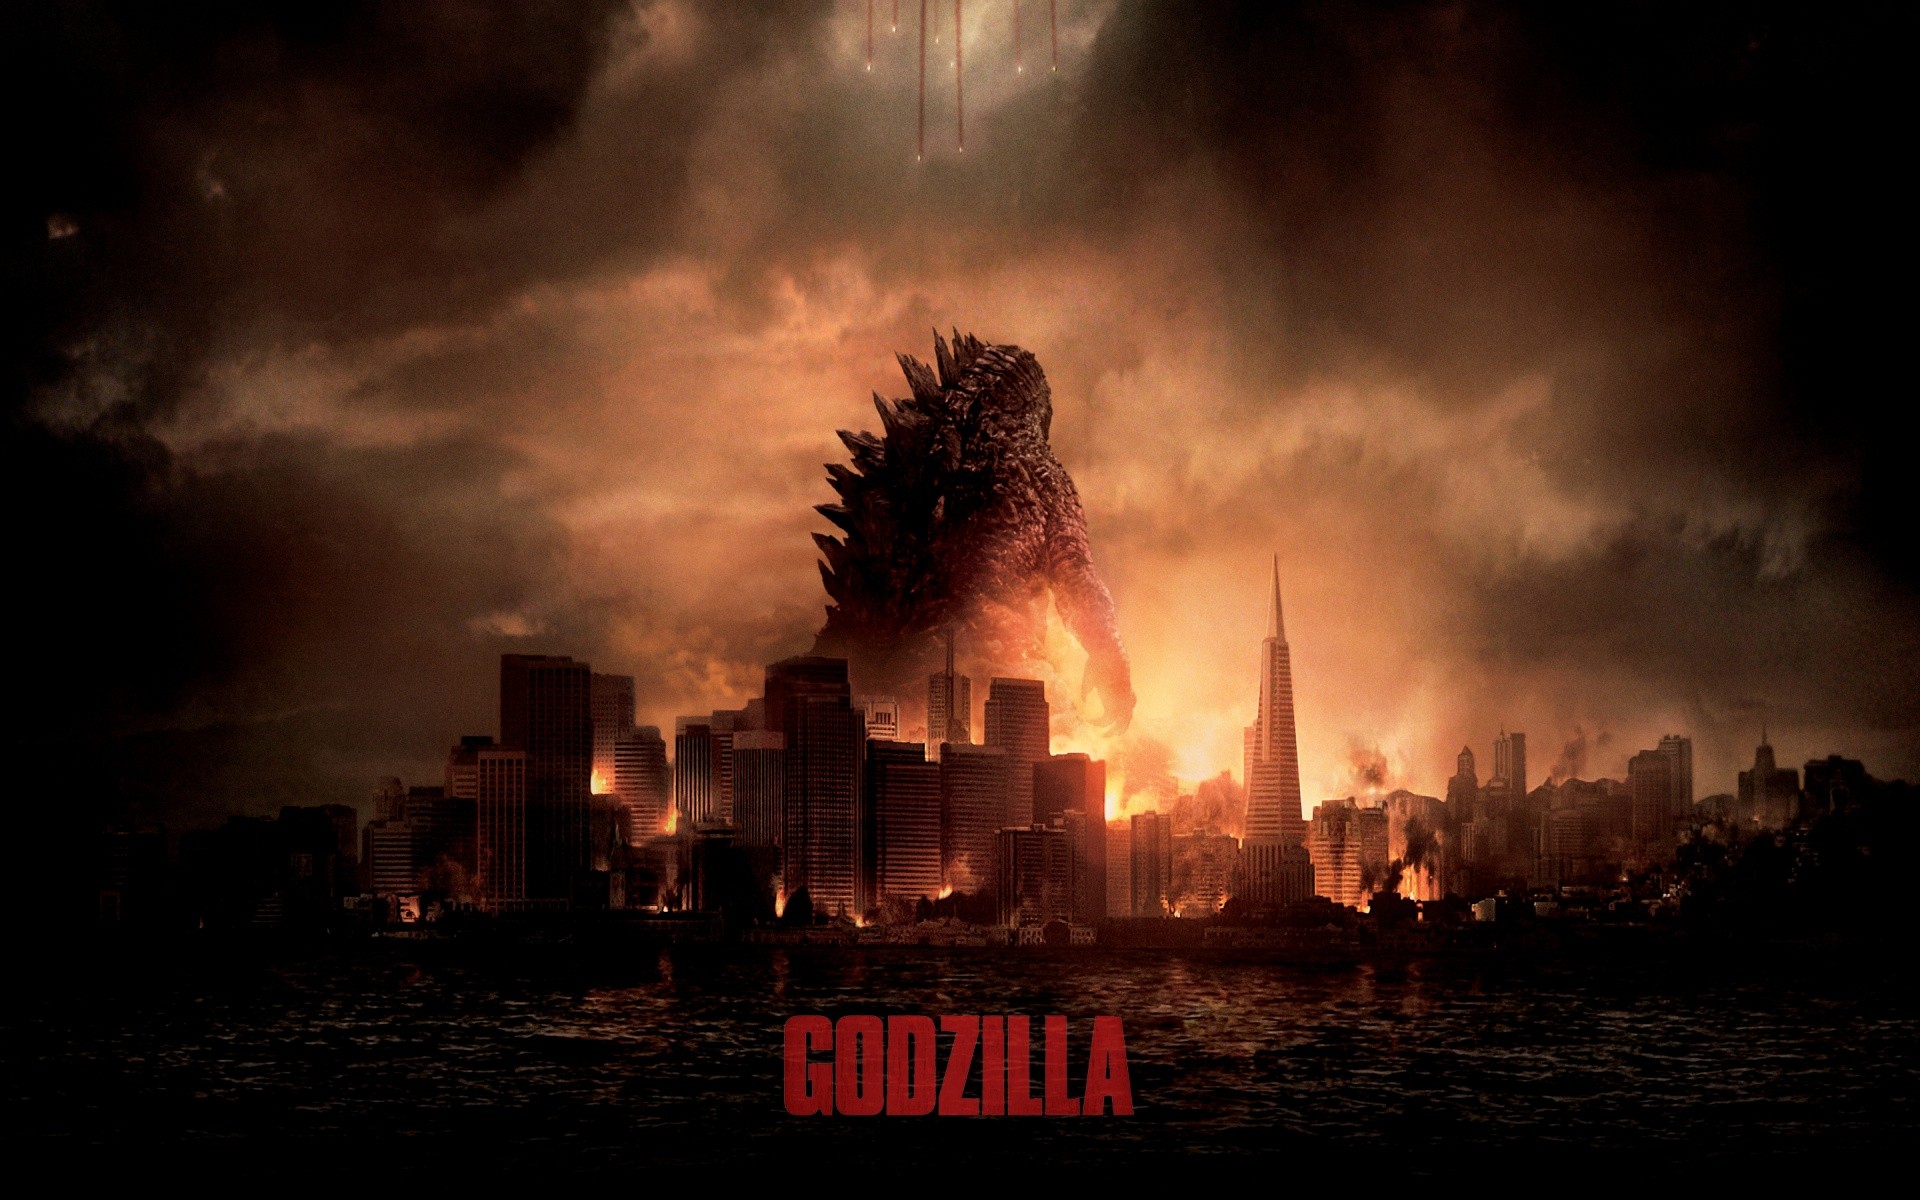 Another Godzilla poster :D